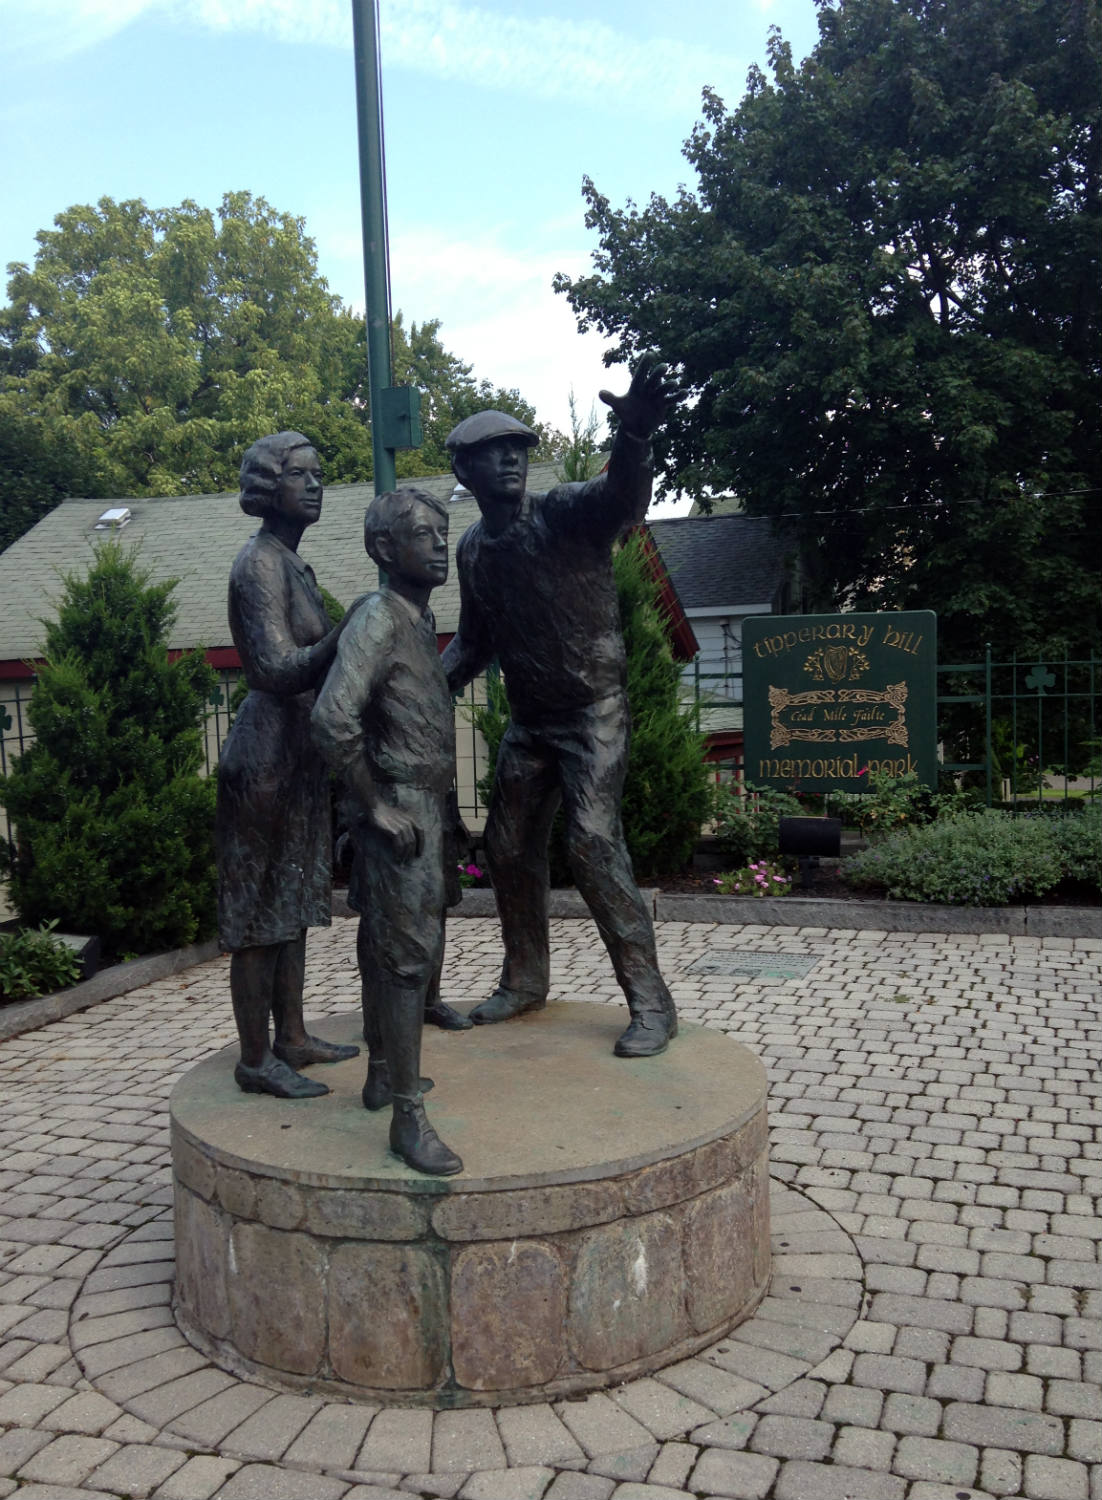 Tipperary Hill Memorial Park Statues